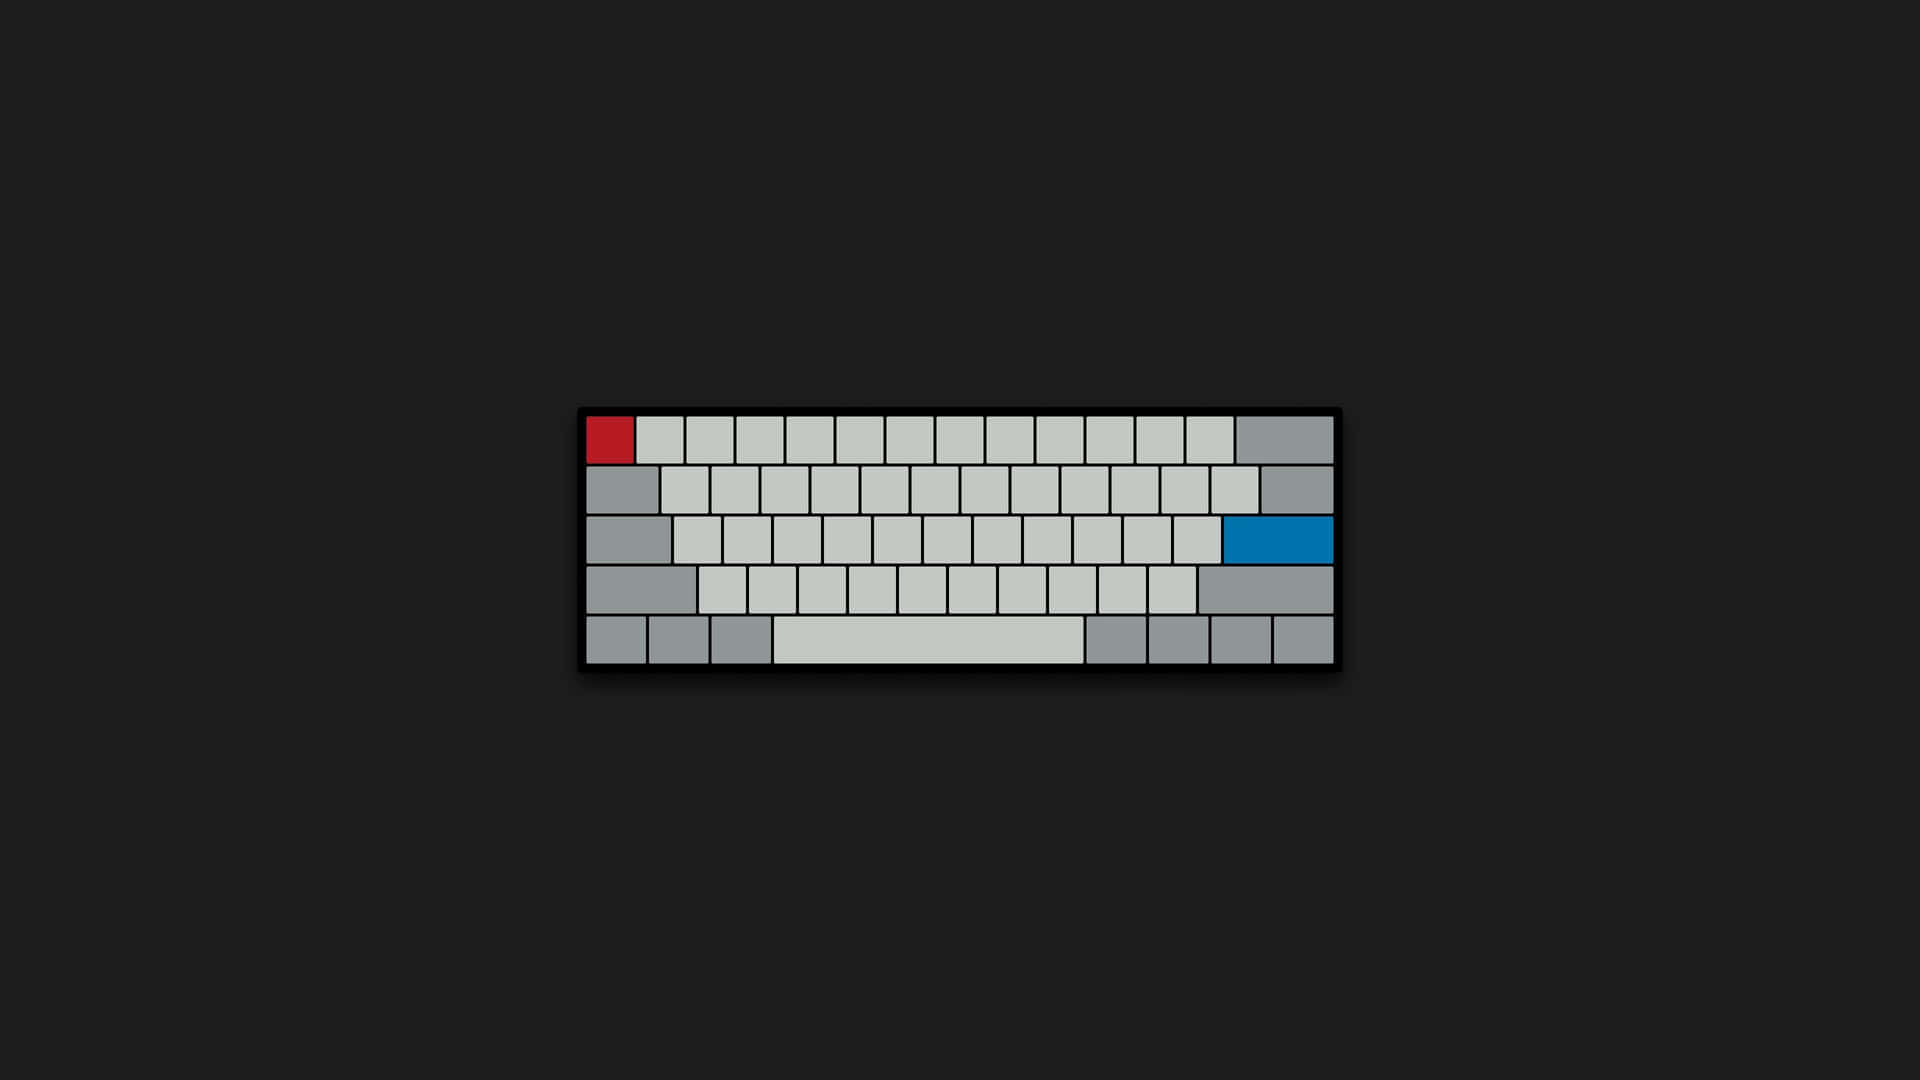 A Keyboard With A Blue And Red Key On A Black Background